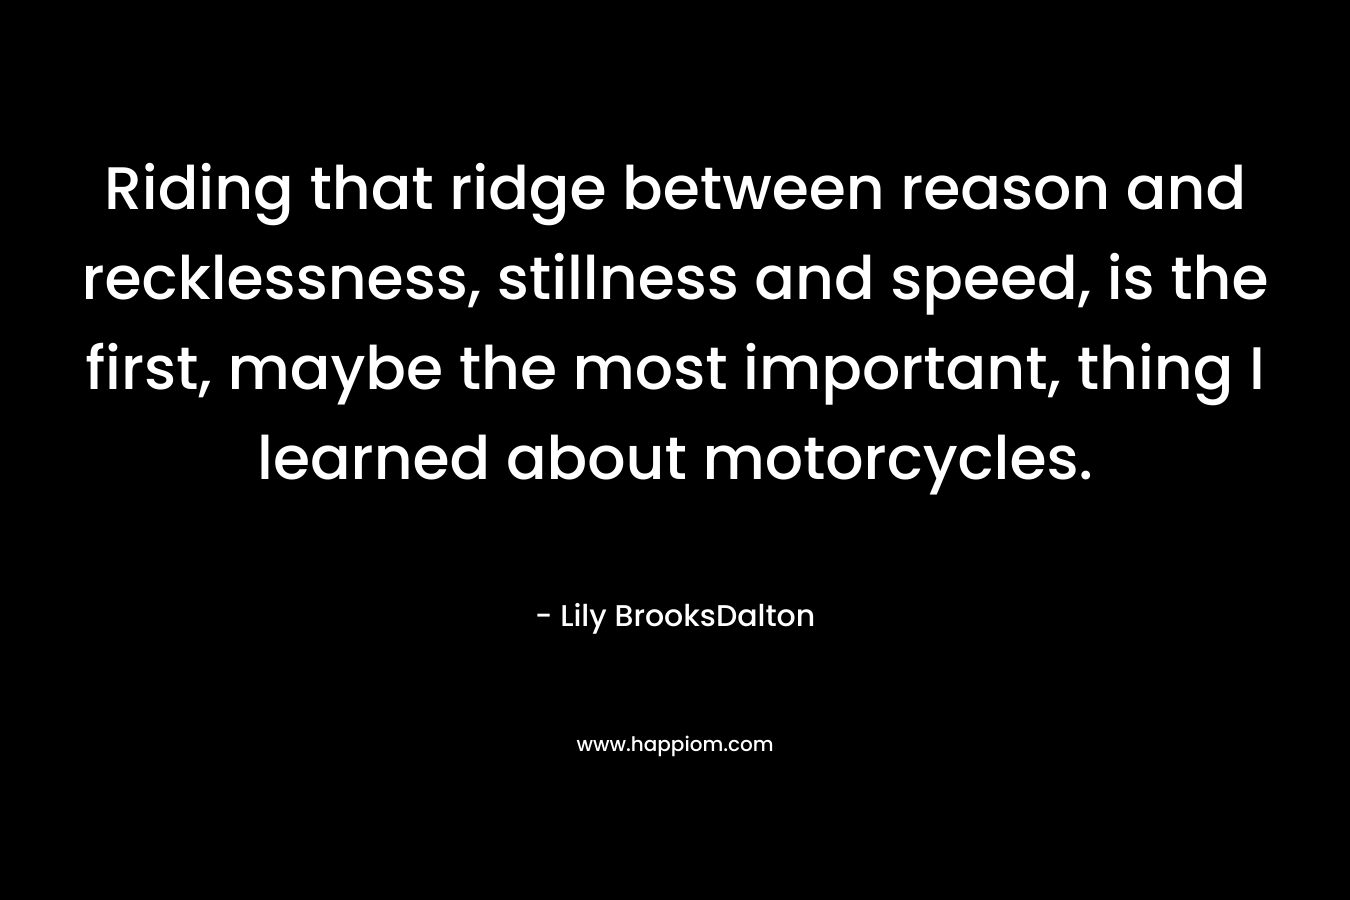 Riding that ridge between reason and recklessness, stillness and speed, is the first, maybe the most important, thing I learned about motorcycles. – Lily BrooksDalton